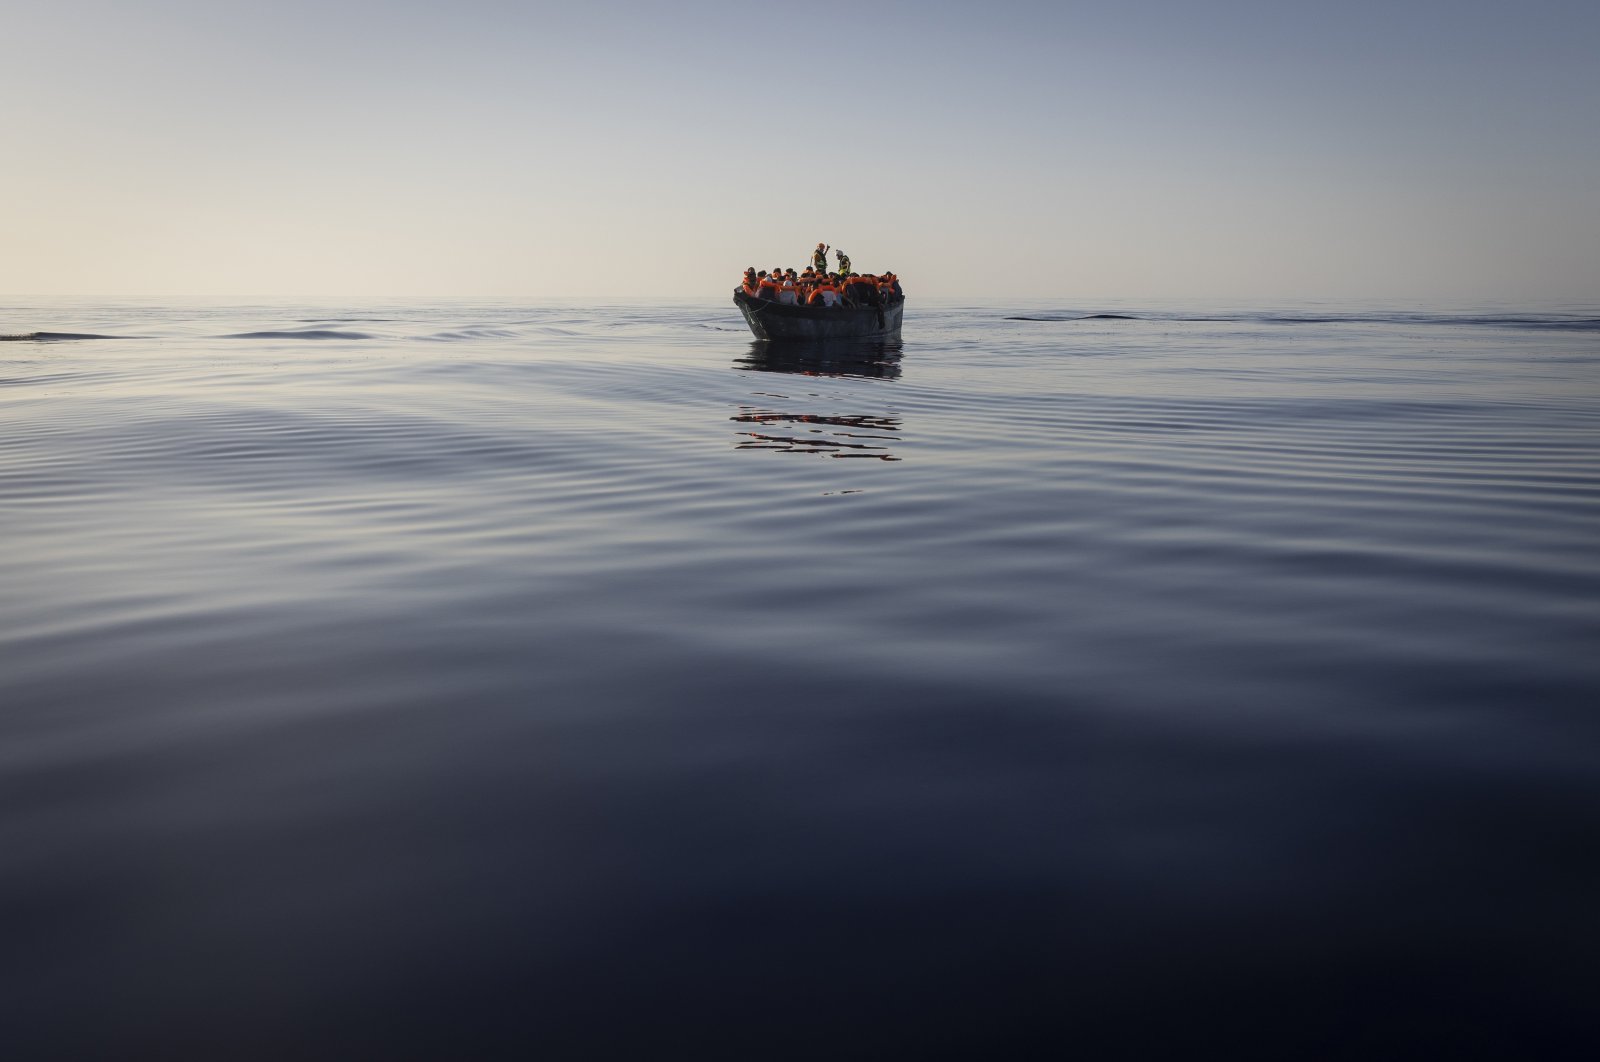 Migrants with life jackets provided by volunteers of the Ocean Viking, a migrant search and rescue ship run by NGOs SOS Mediterranee and the International Federation of Red Cross (IFCR), still sail in a wooden boat as they are being rescued in the Mediterranean Sea, Aug. 27, 2022. (AP Photo)